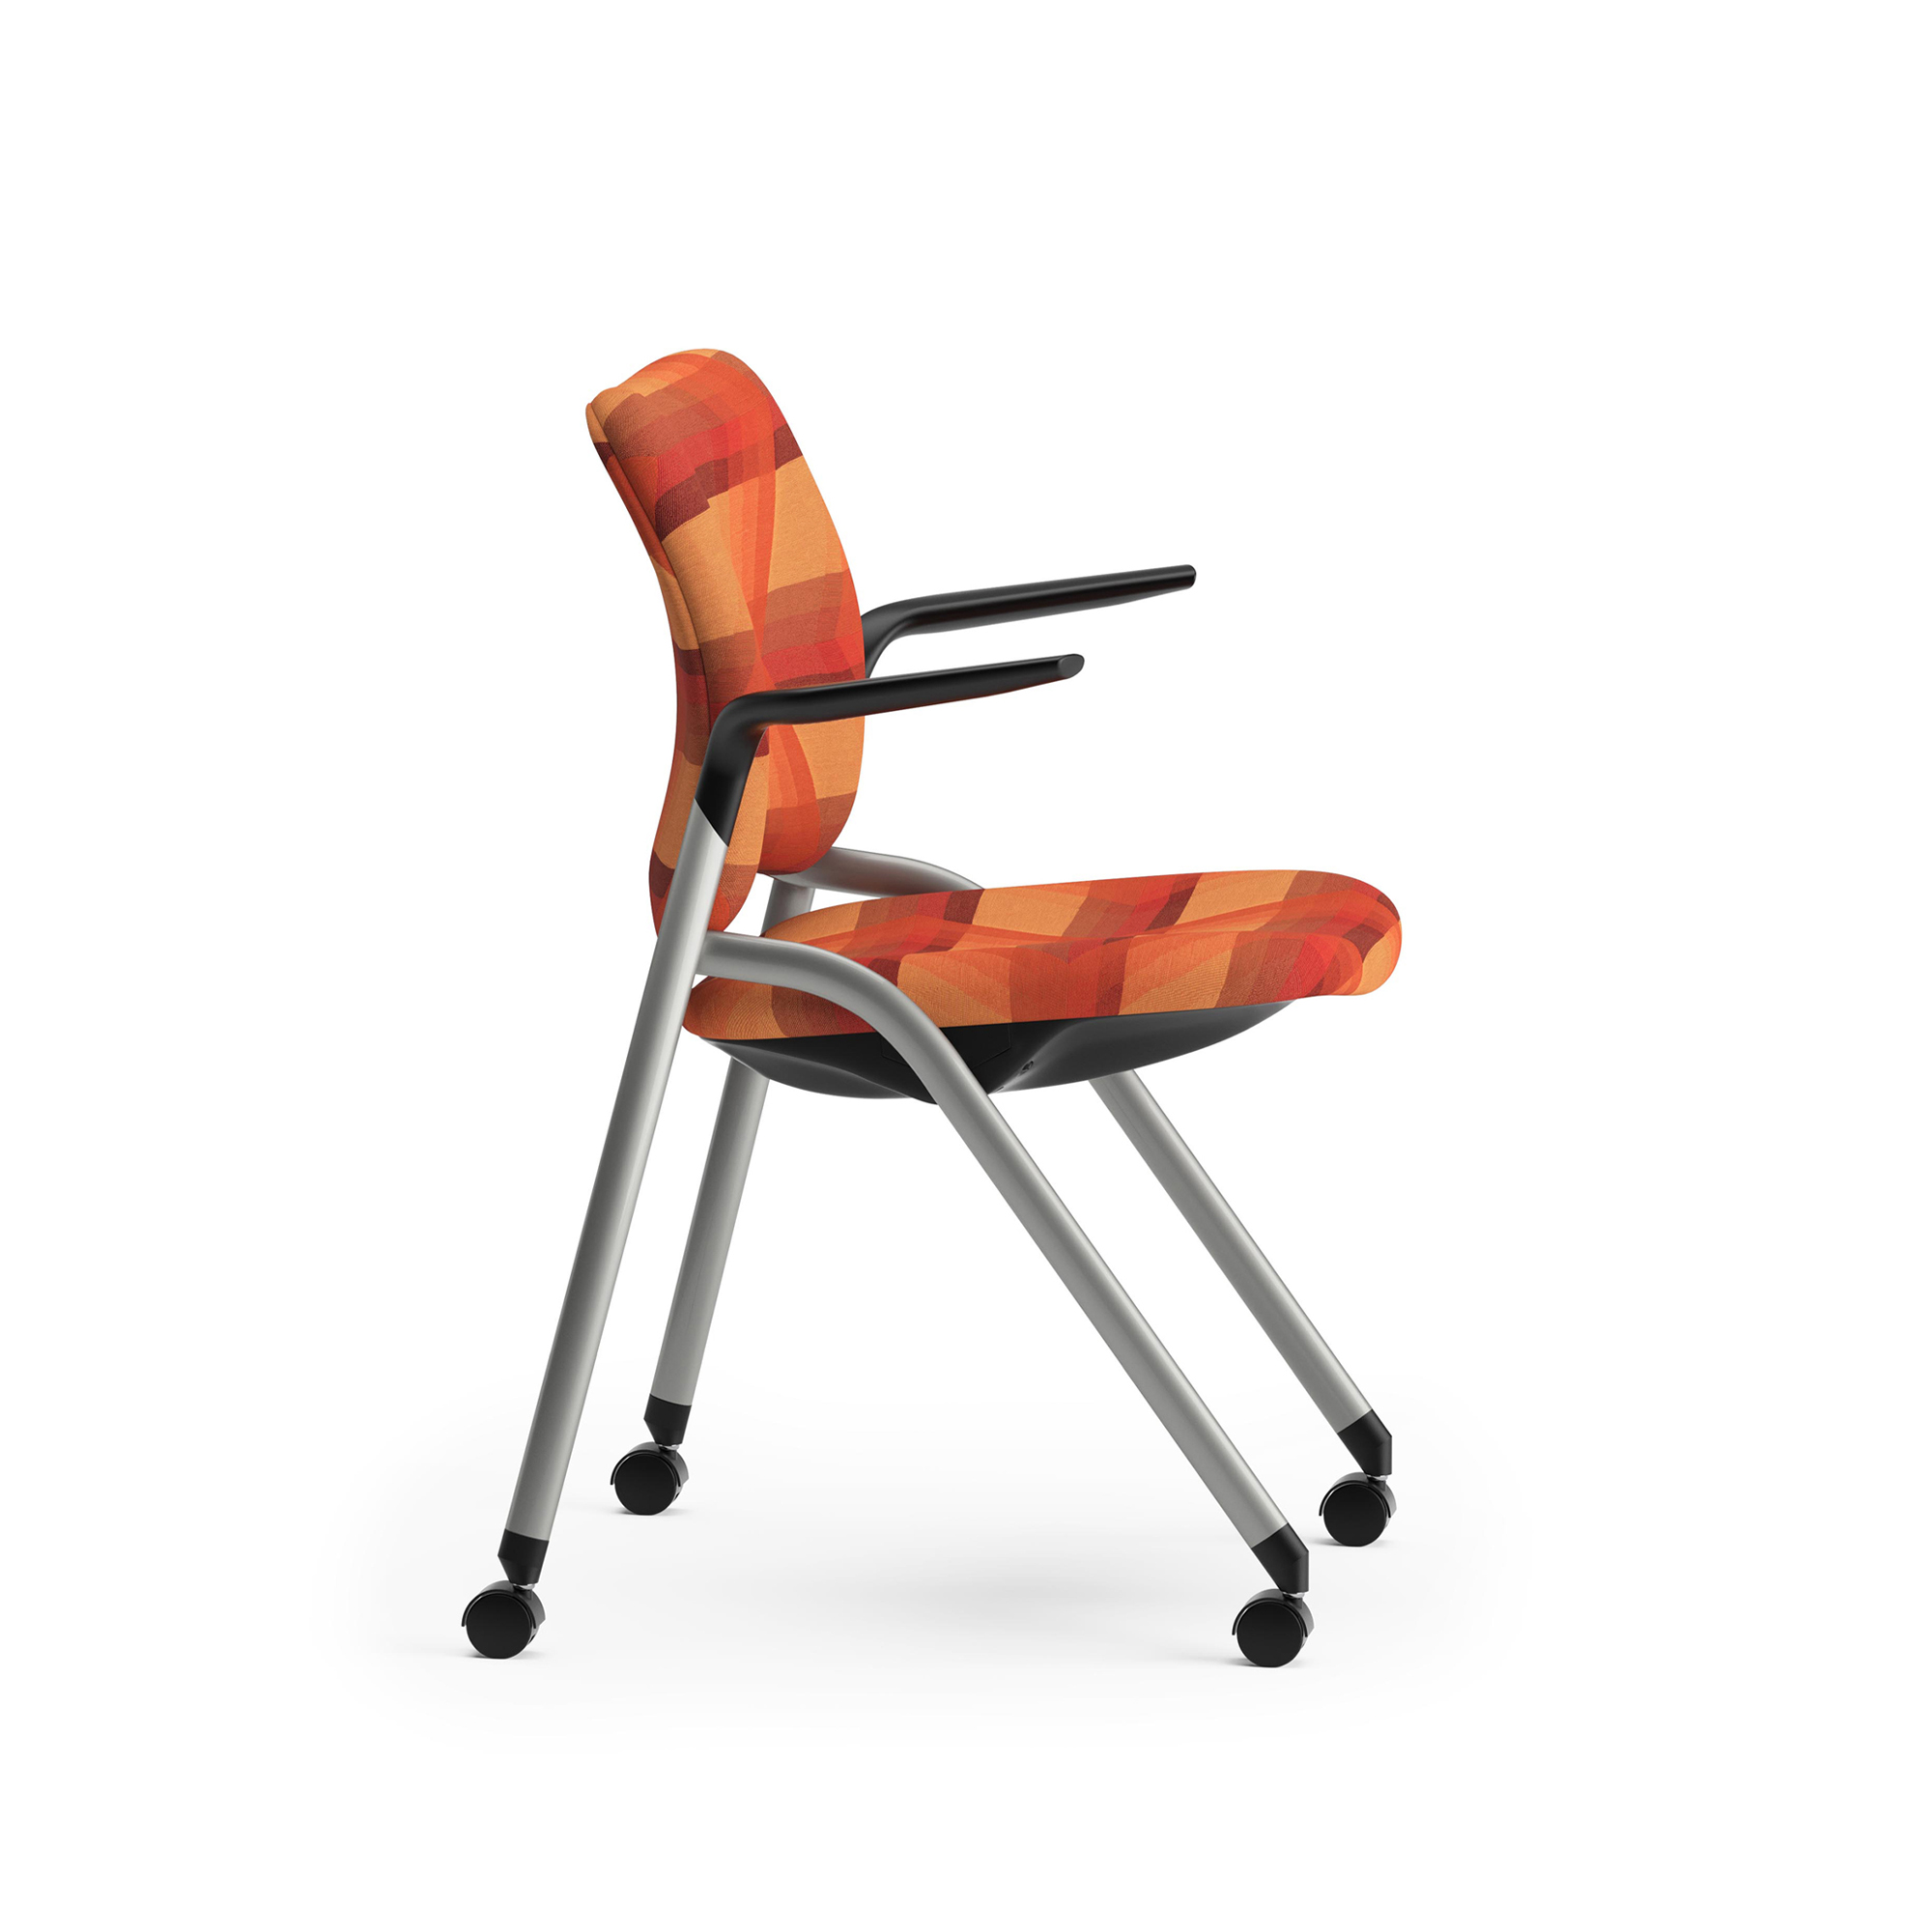 Nexxt Nesting Guest Chair, Arms, Casters